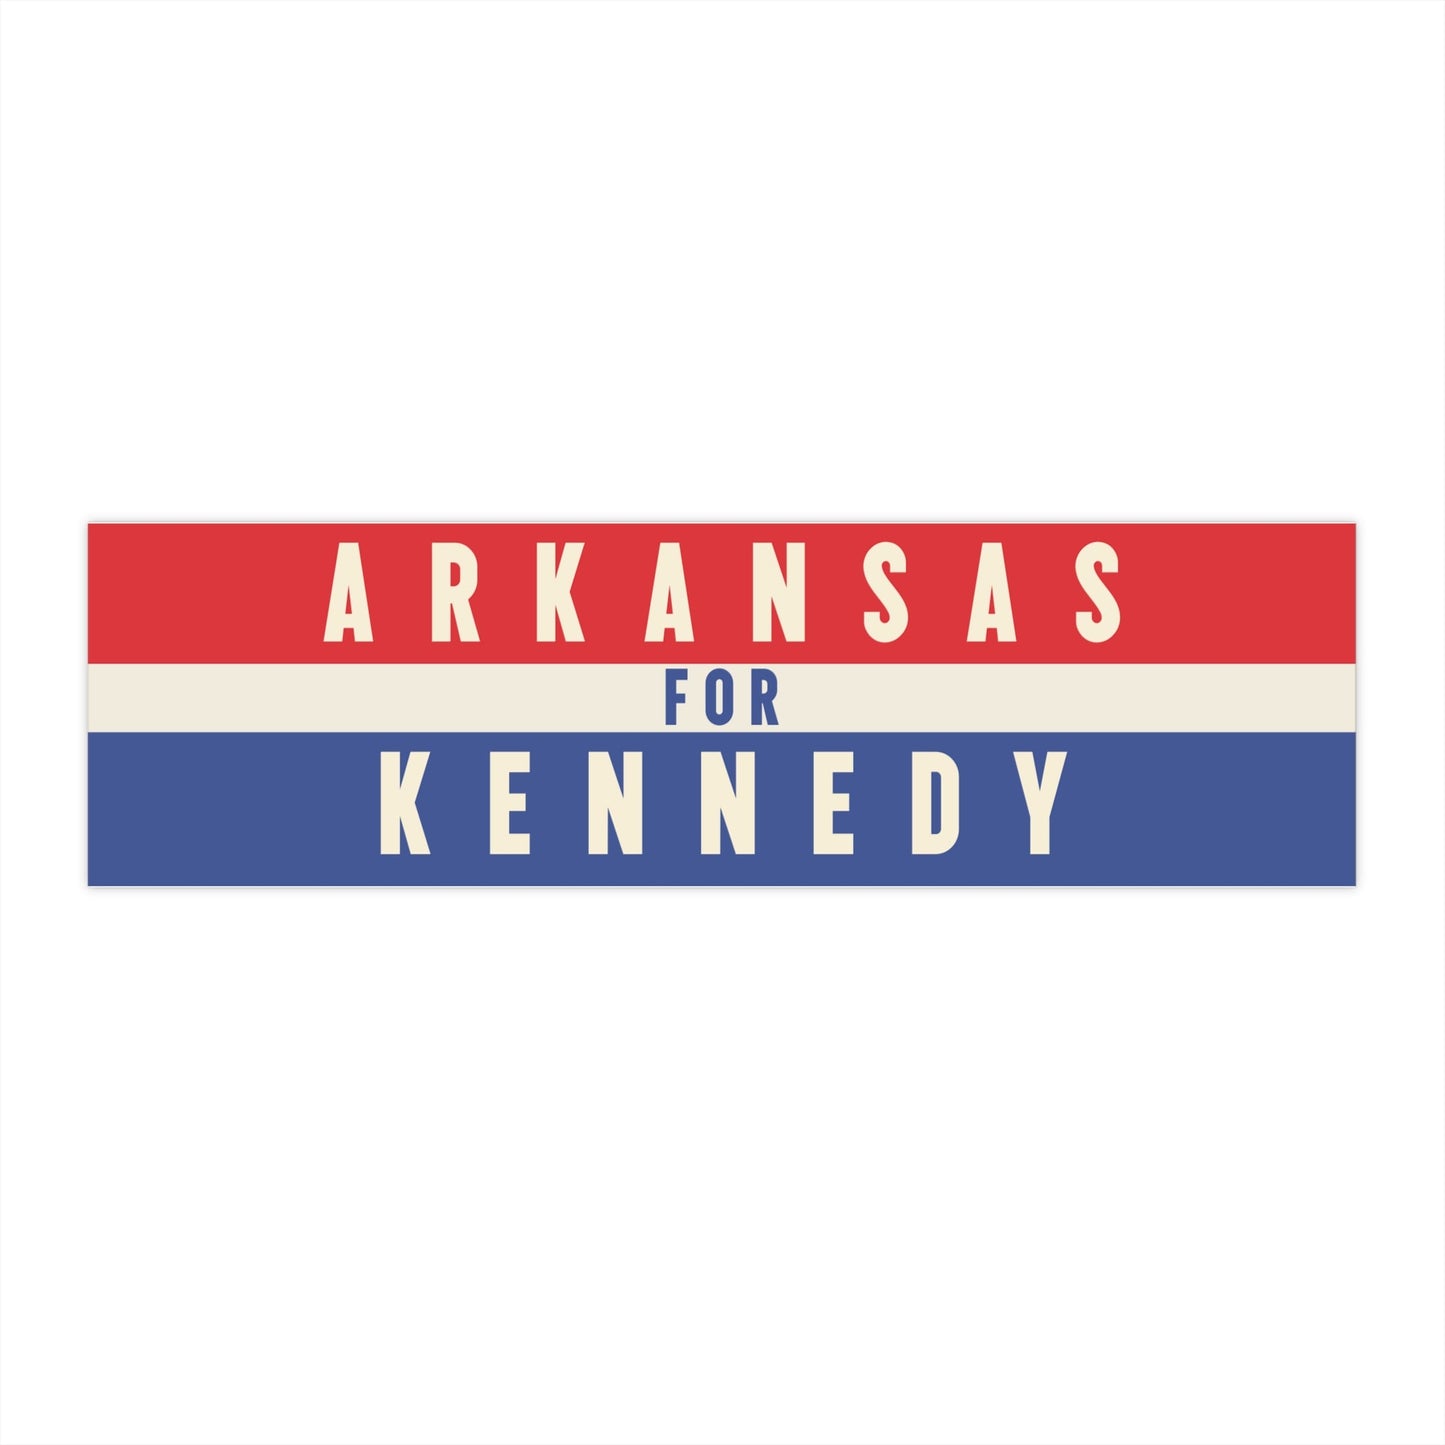 Arkansas for Kennedy Bumper Sticker - TEAM KENNEDY. All rights reserved